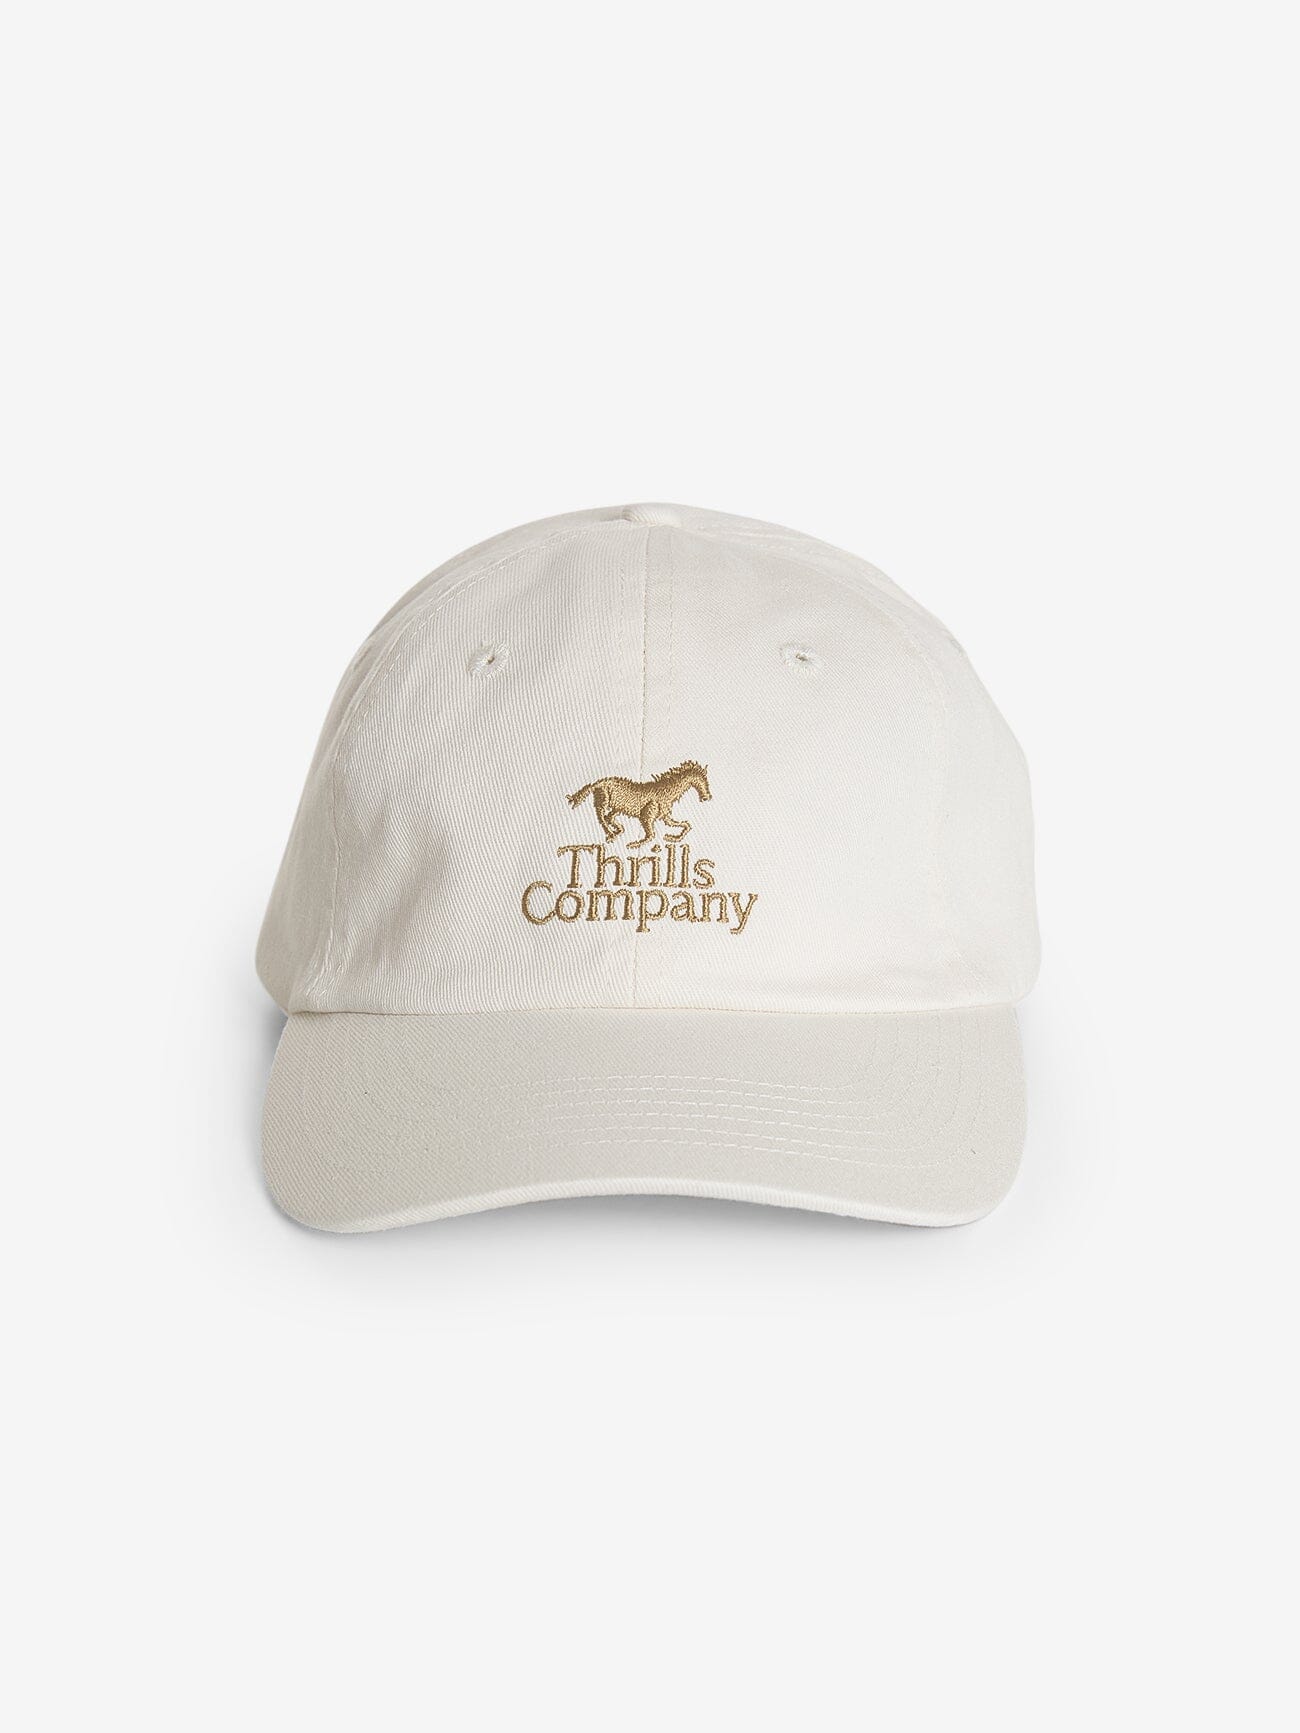 Chariot Rides on 6 Panel Cap - Heritage White One Size